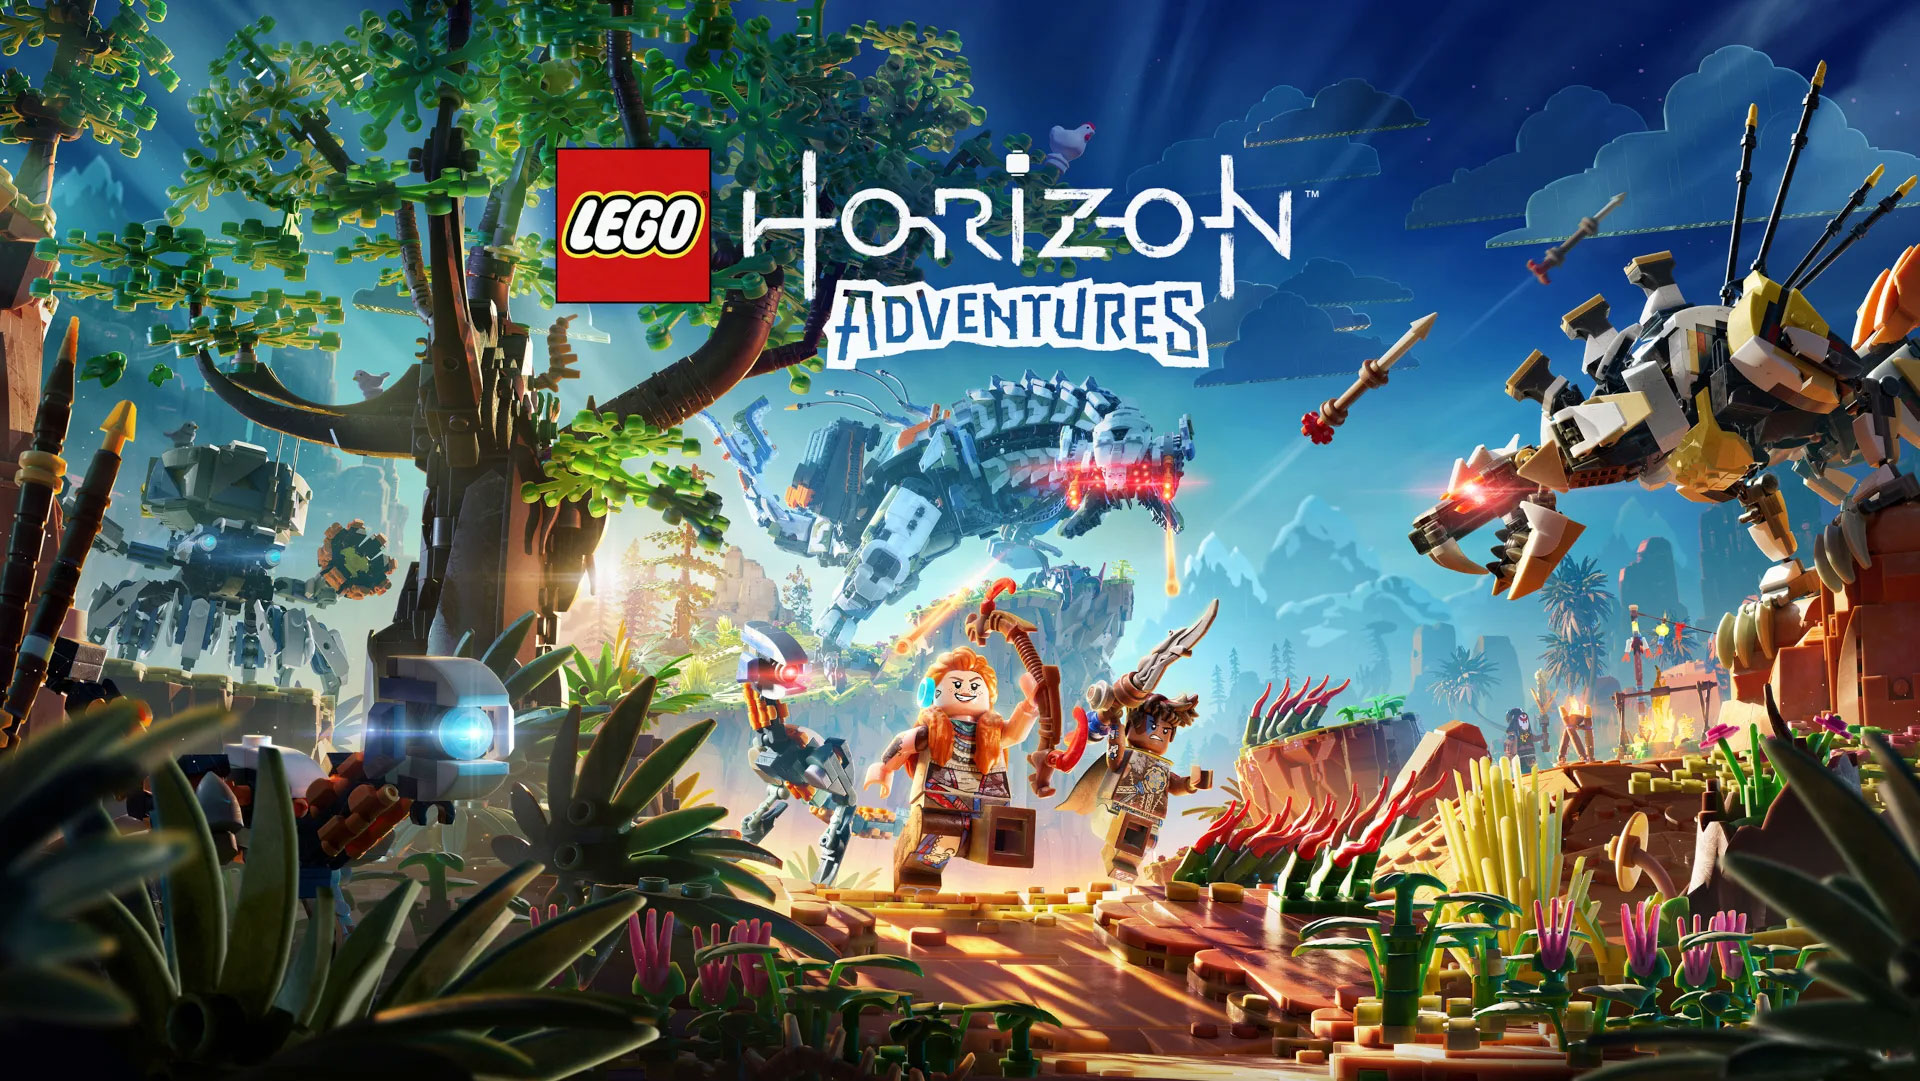 LEGO Horizon Adventures heads to PlayStation, Switch, and PC this holiday season